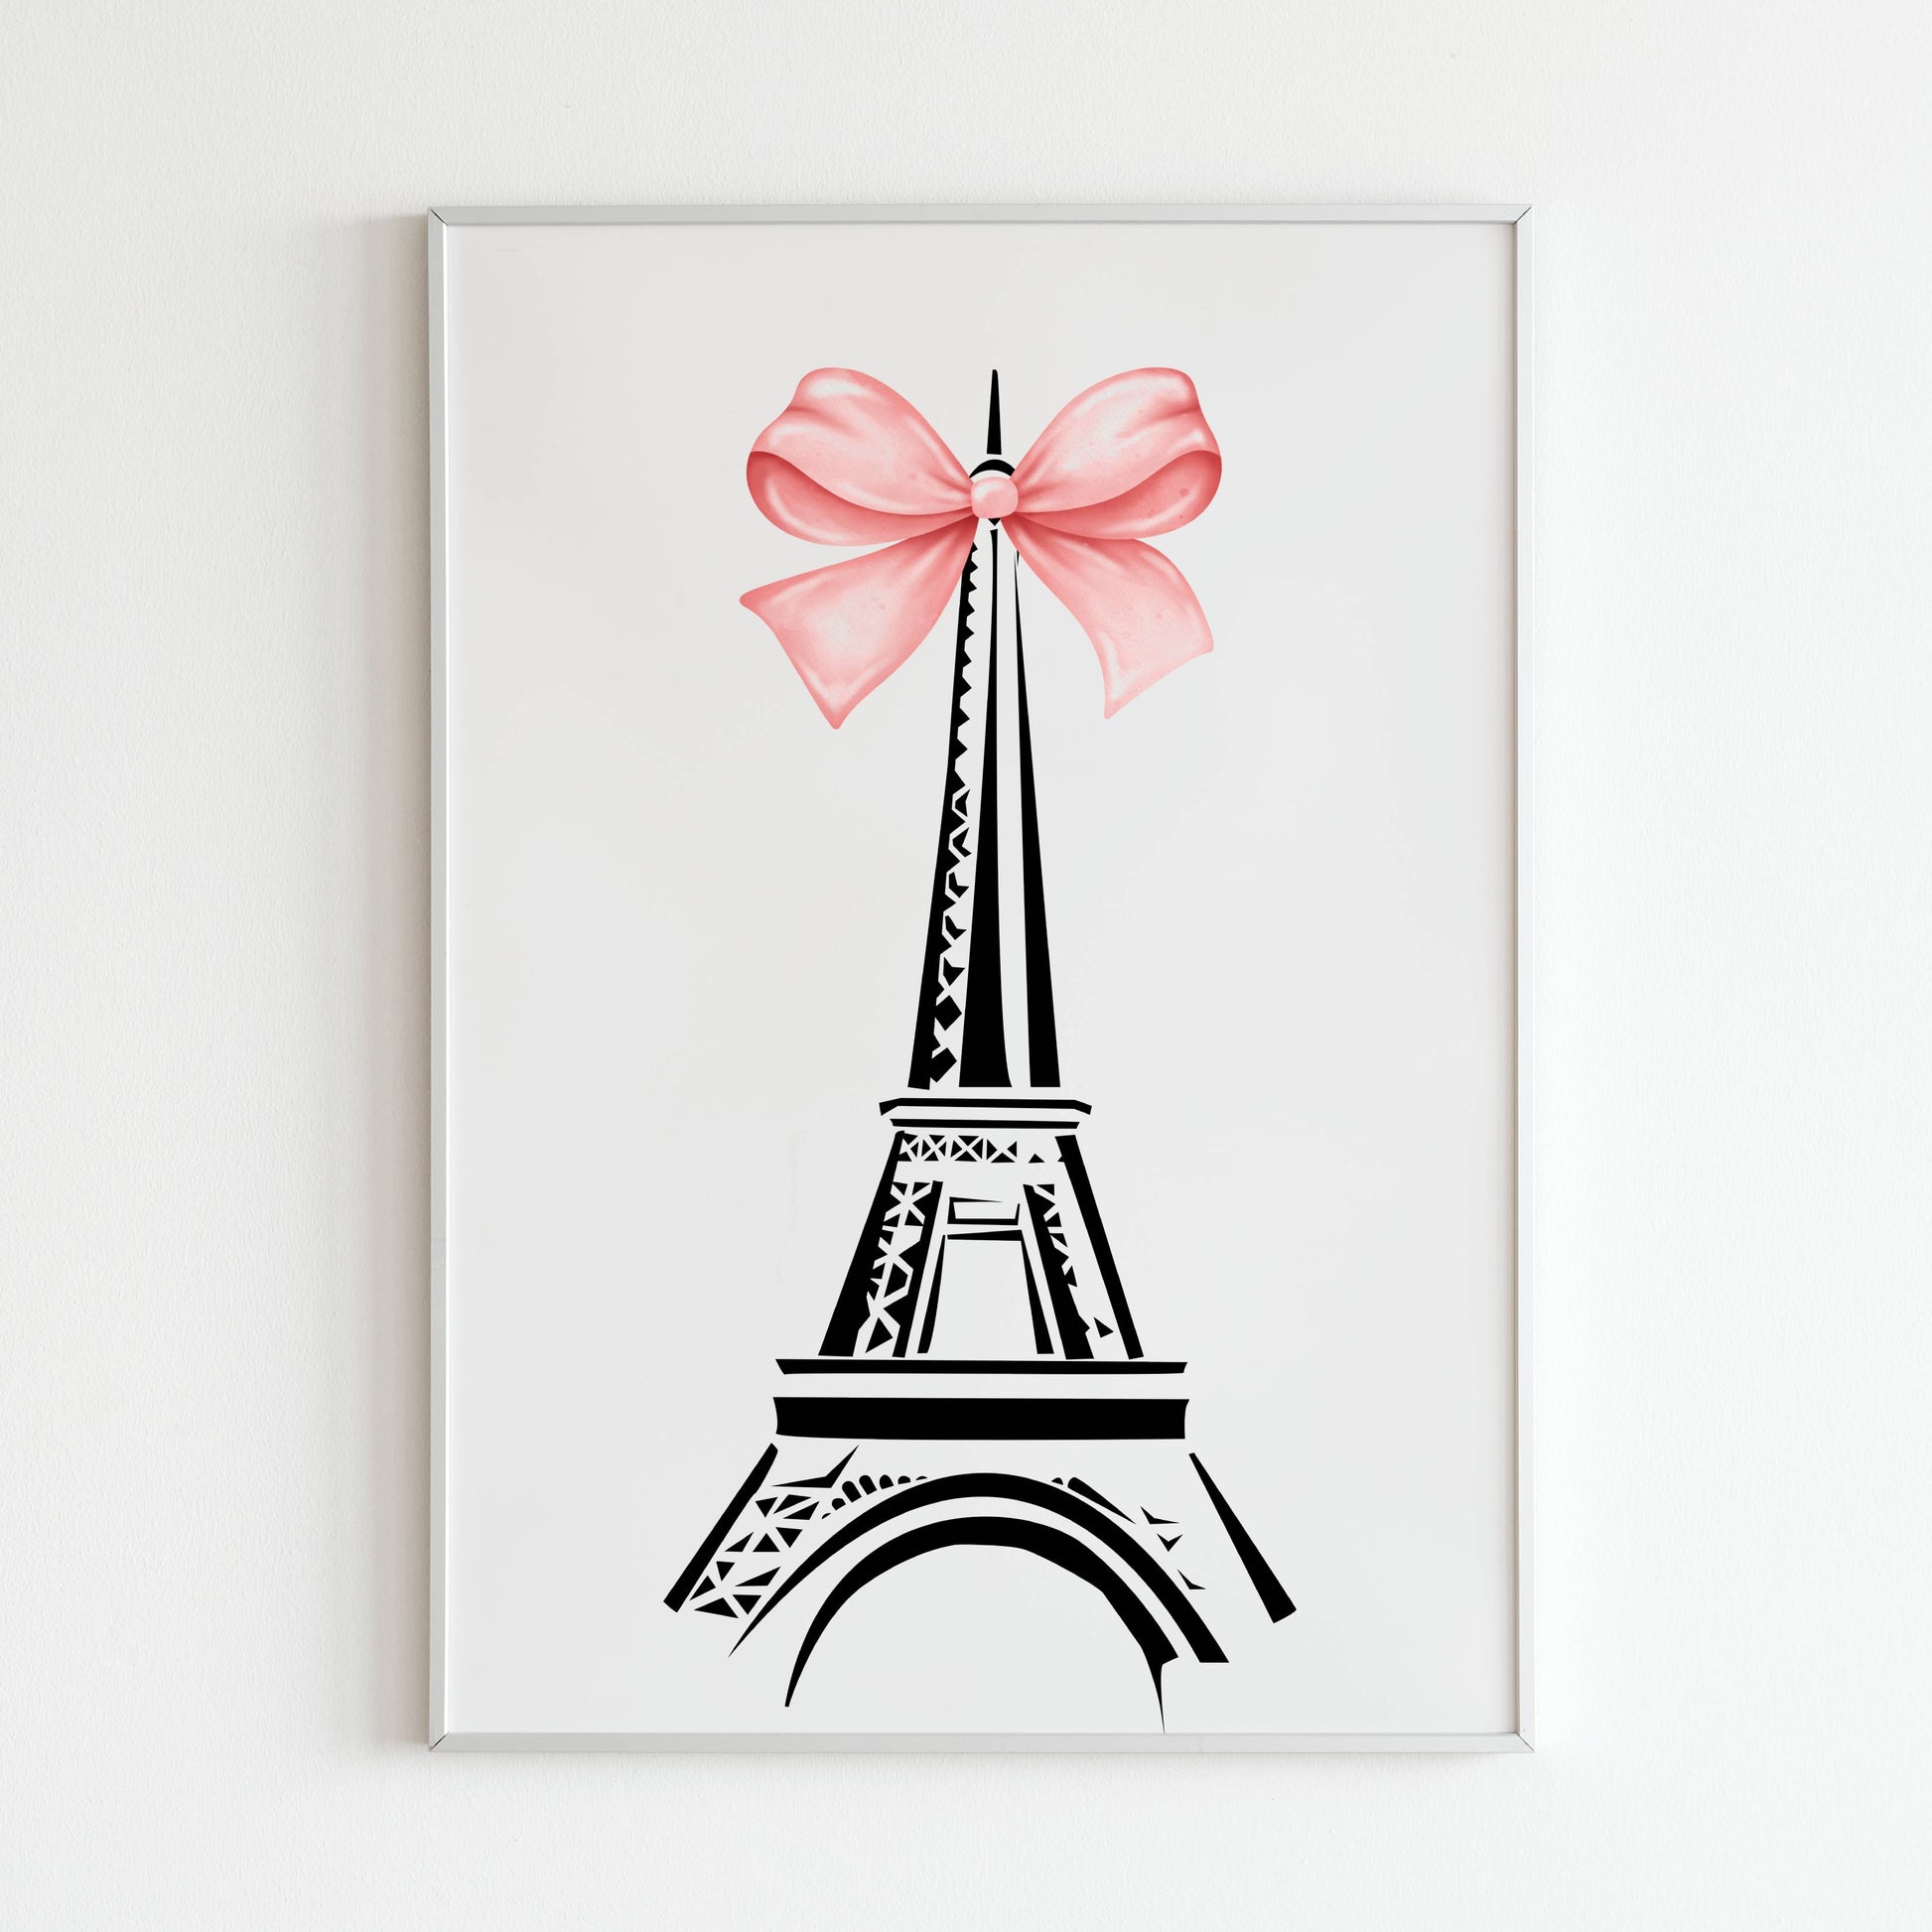 Downloadable "Cute Eiffel Tower" wall art for a touch of Parisian charm.